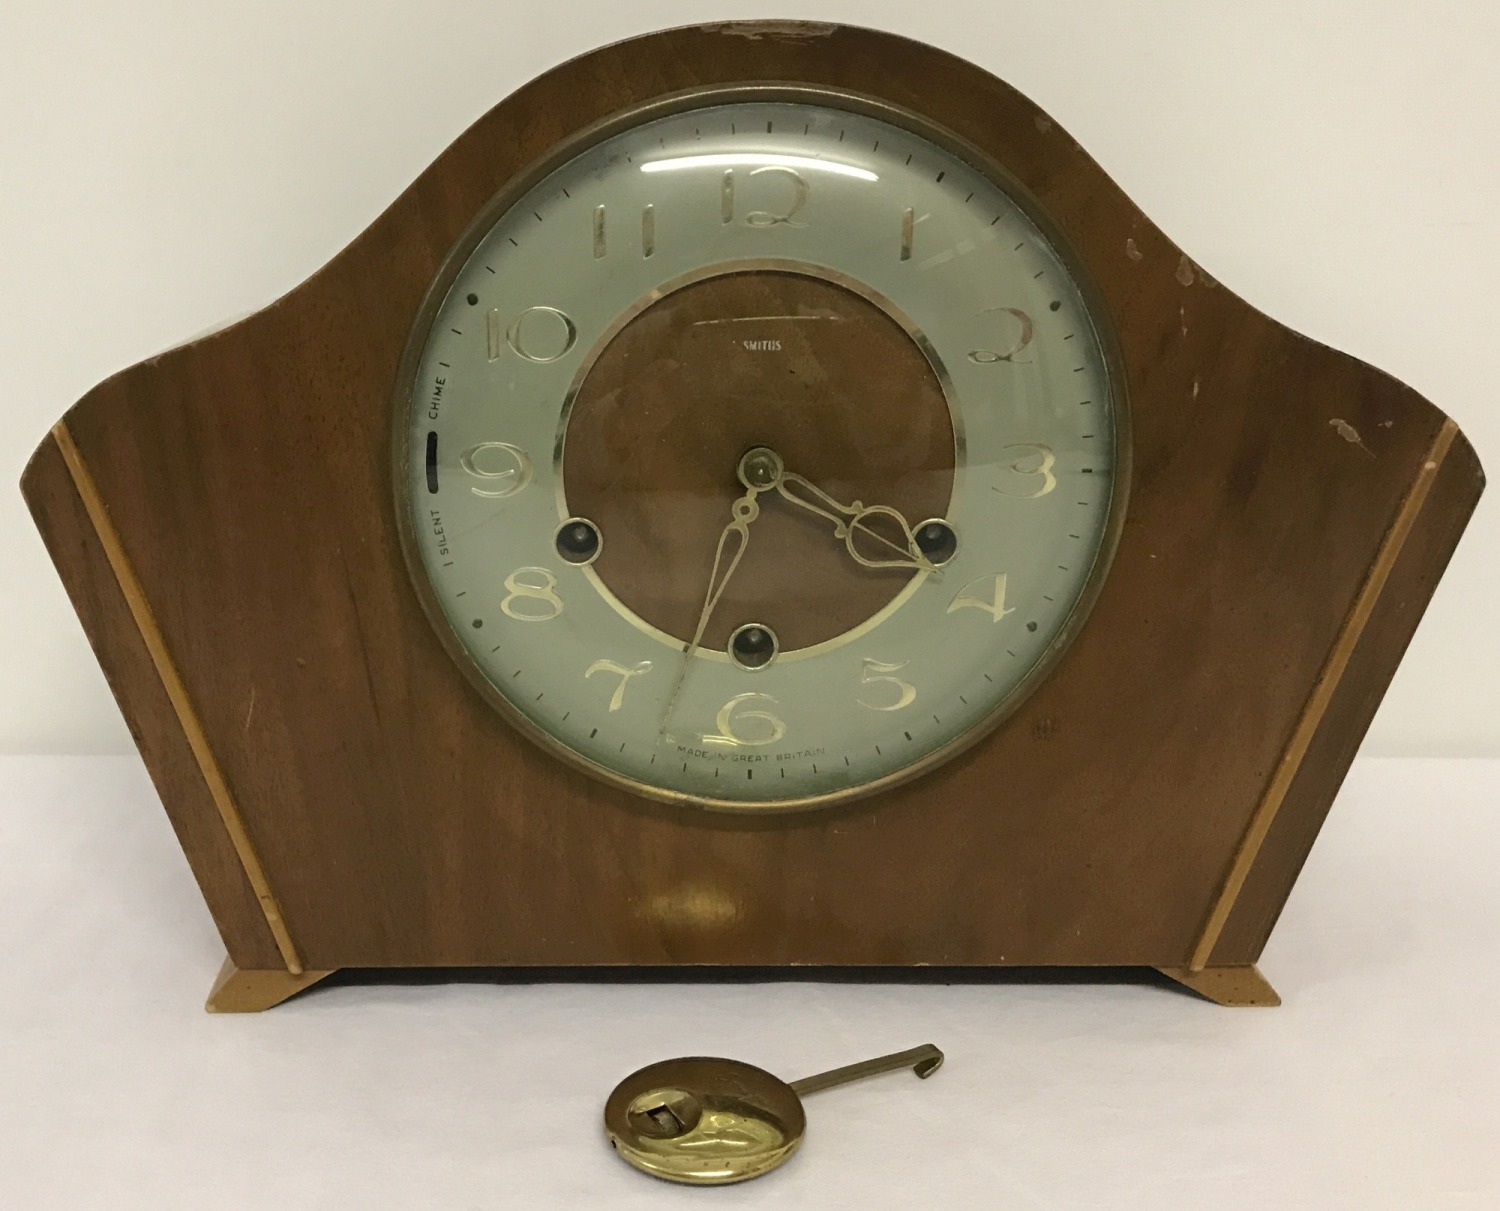 A mid-20th century Smiths 3 key clock with Westminster chime.